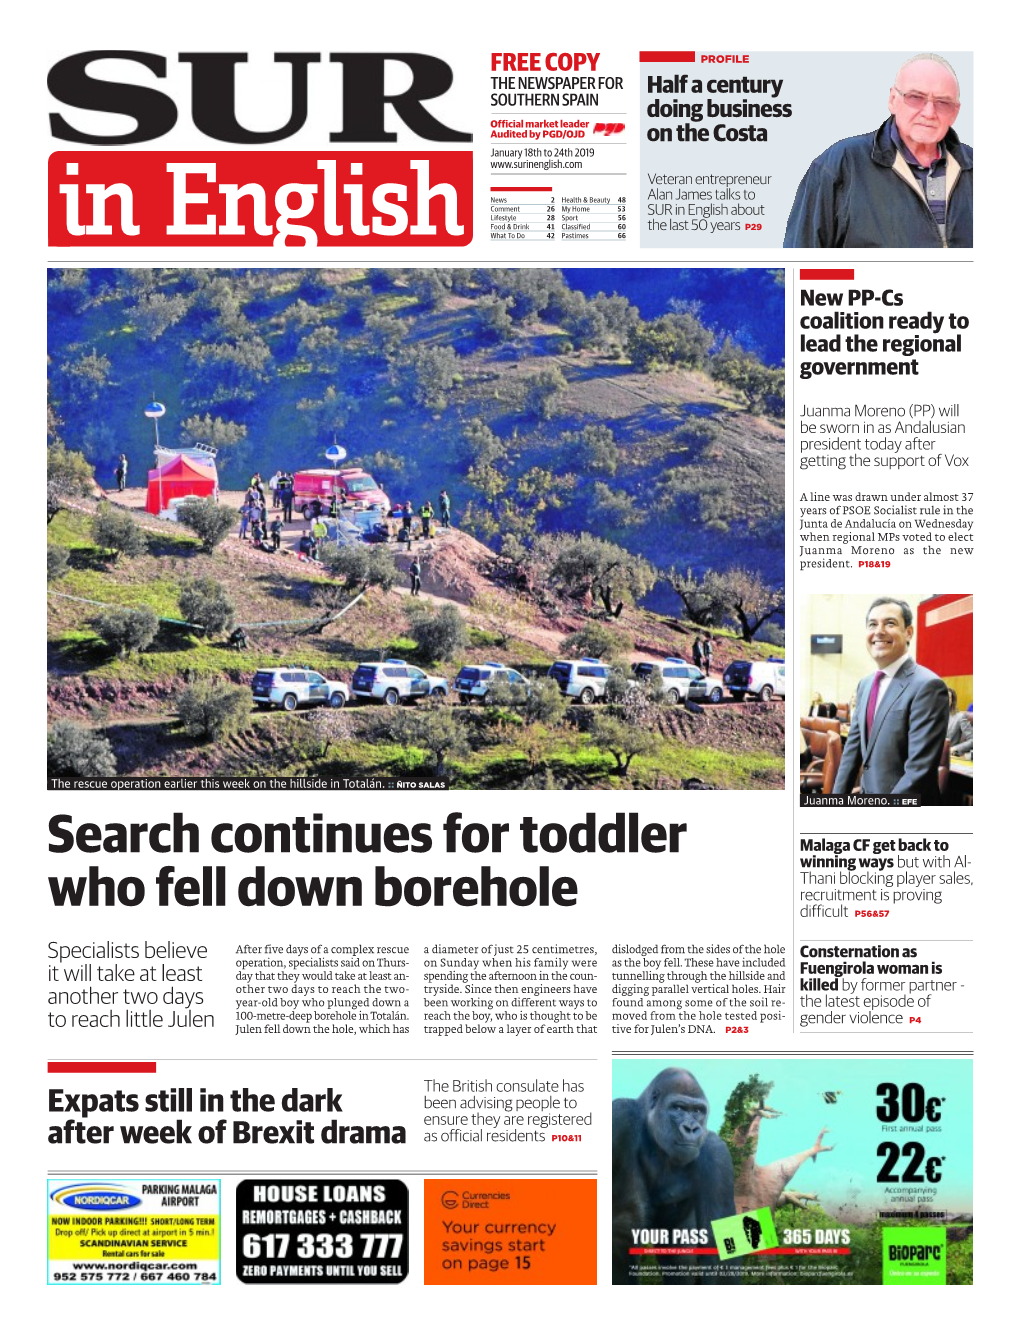 Search Continues for Toddler Who Fell Down Borehole